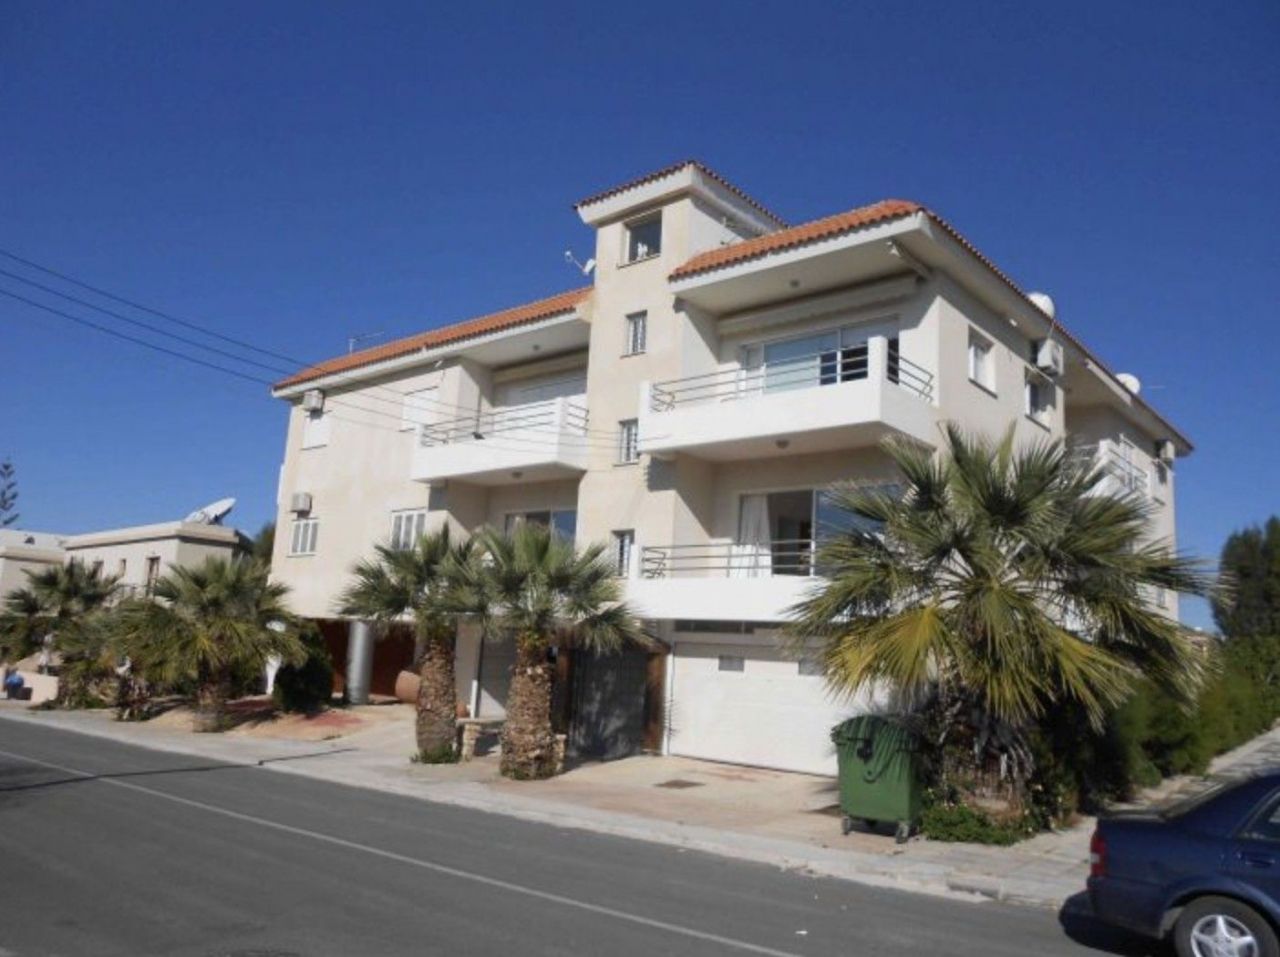 Commercial property in Paphos, Cyprus - picture 1